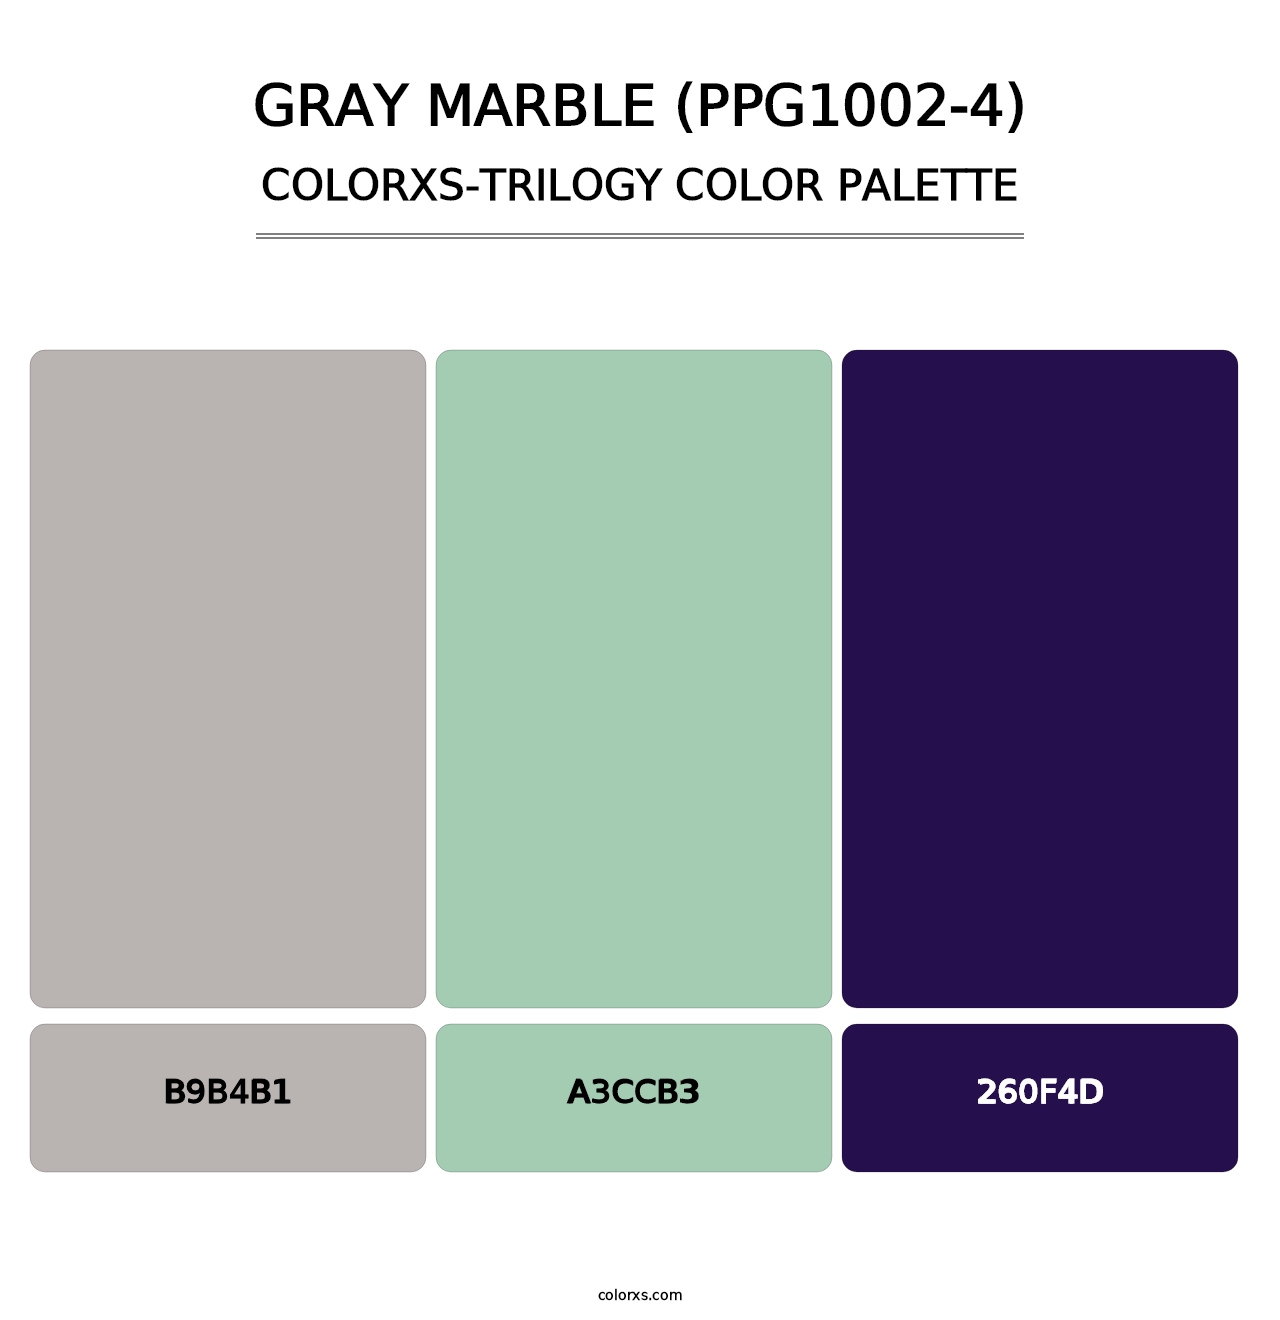 Gray Marble (PPG1002-4) - Colorxs Trilogy Palette